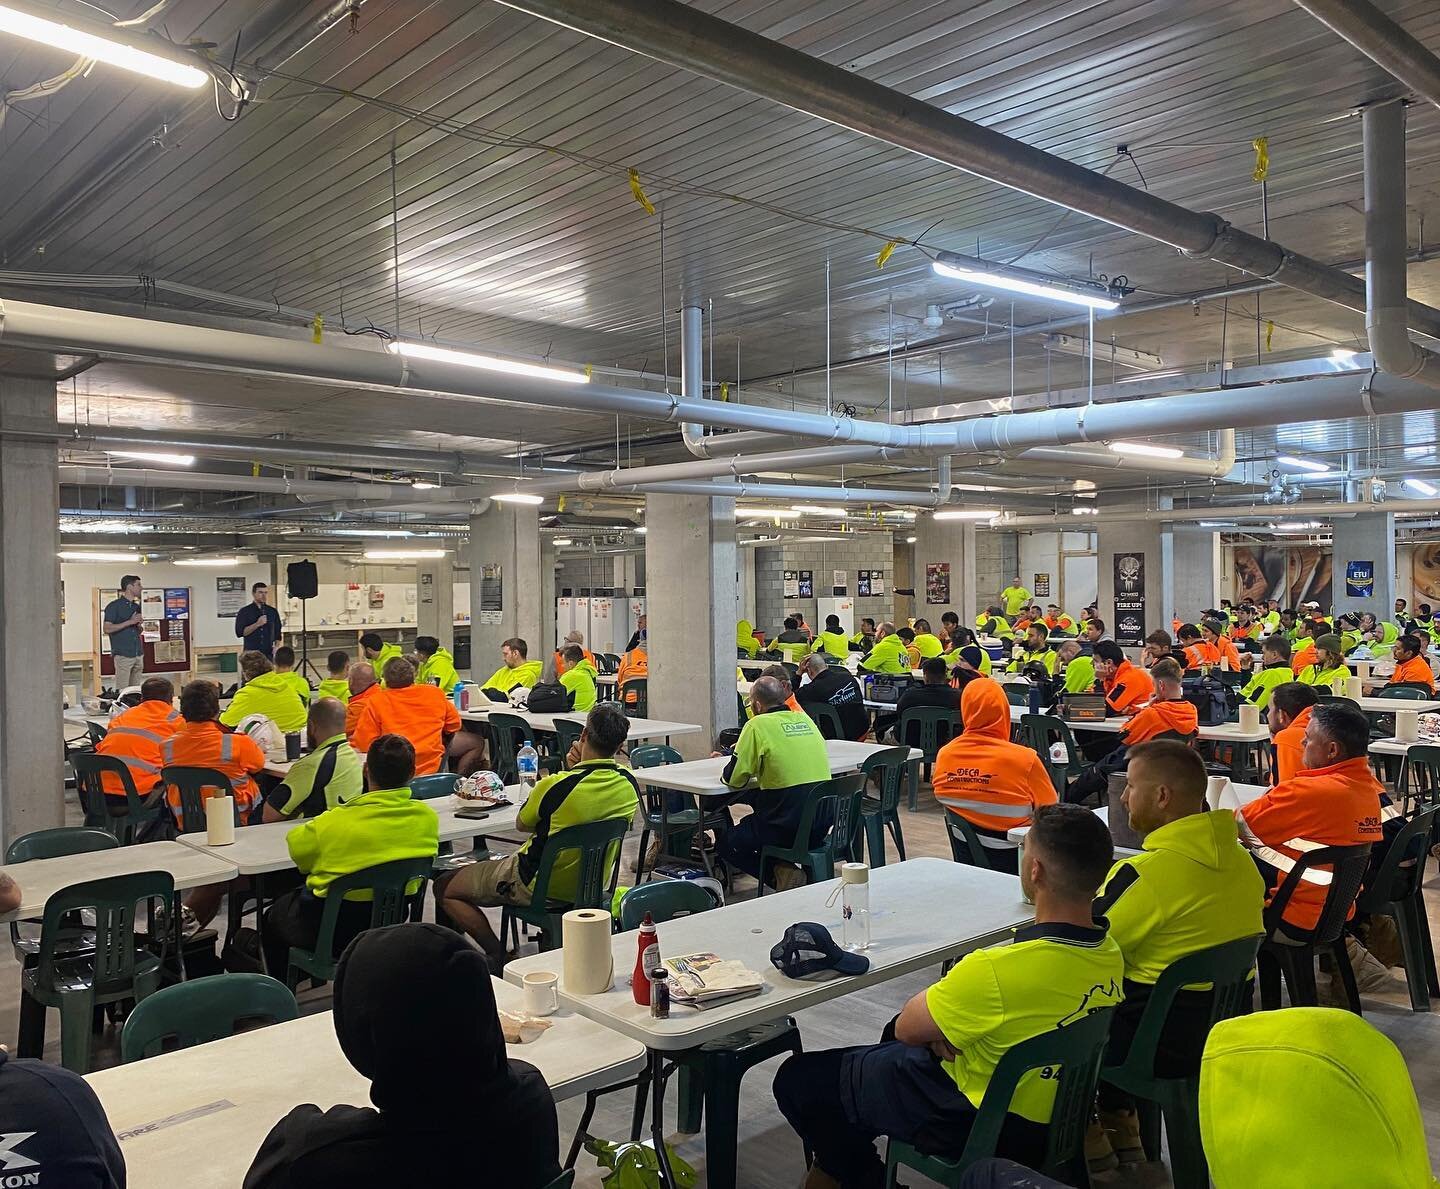 We kicked off R U OK? Day at one of Icons construction sites in Melbourne at their tool box meeting, speaking to over 300 people packed into the lunch sheds. 

For some reason they said Mike didn&rsquo;t need to wear steel capped boots and Ben should